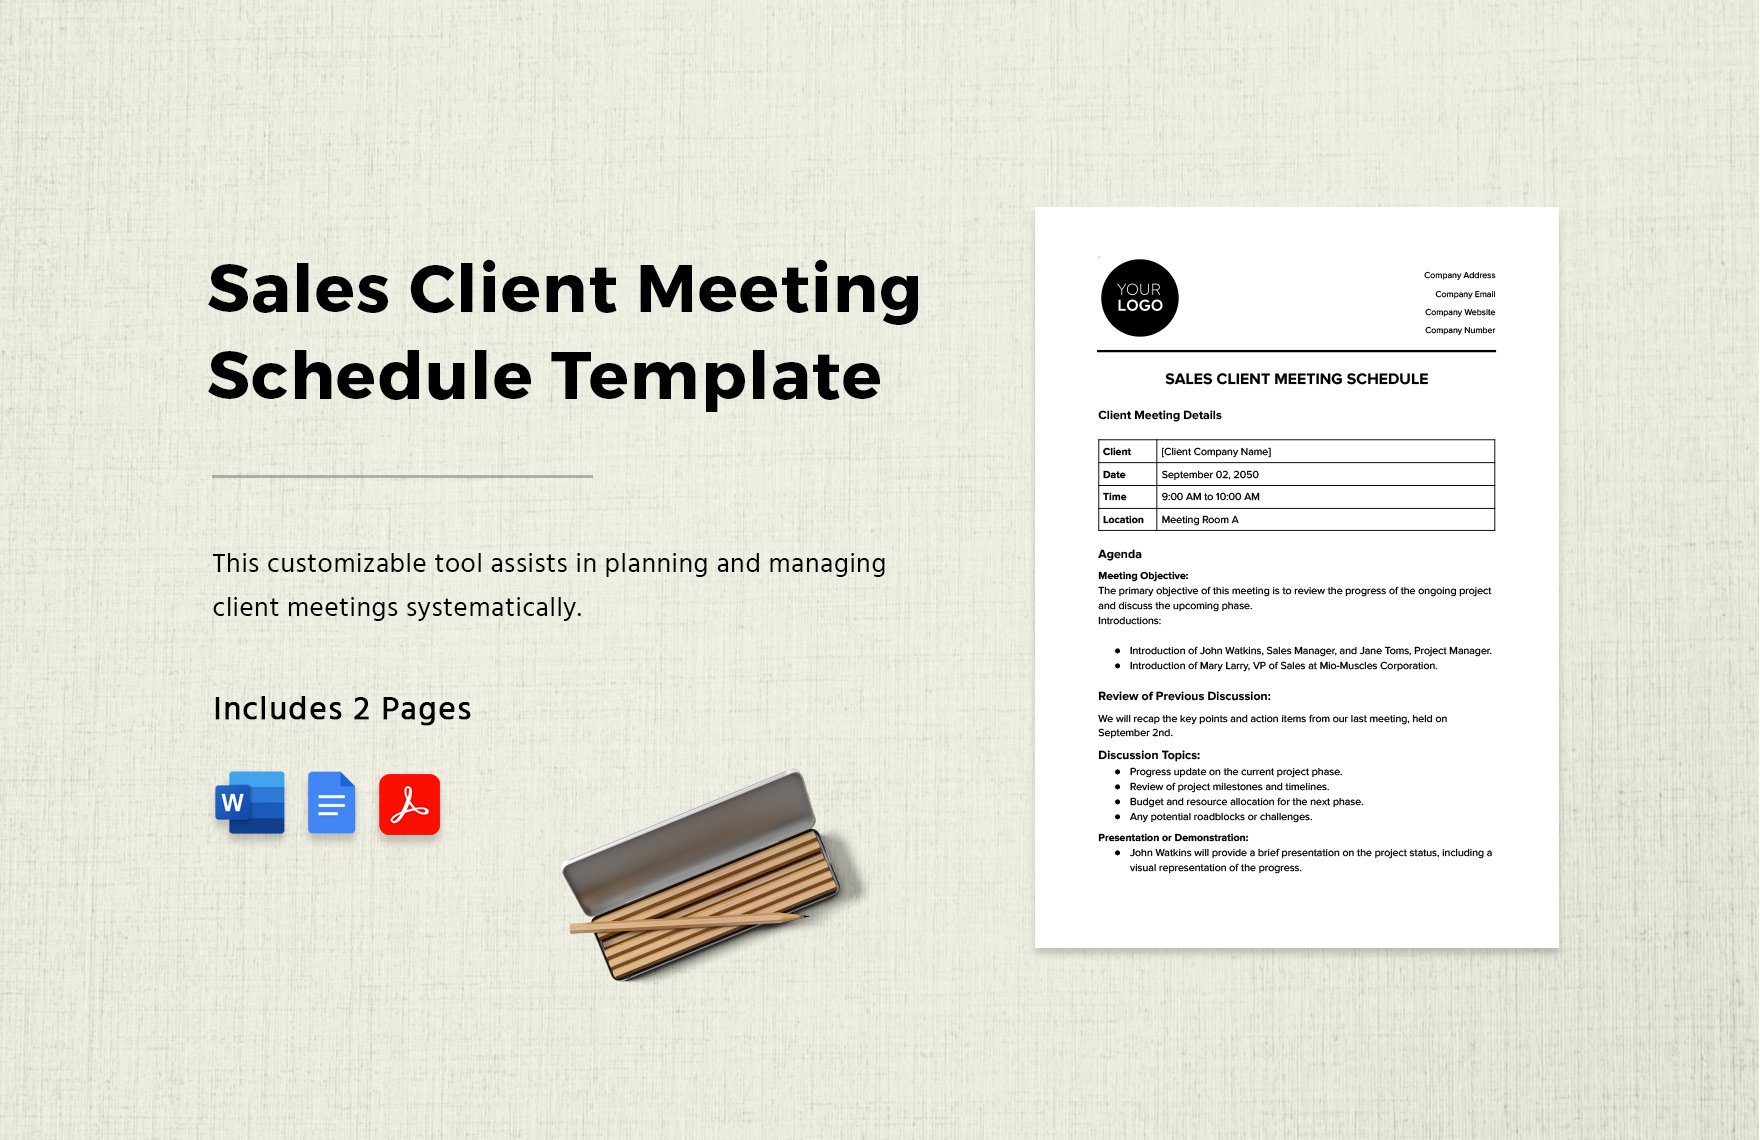 Sales Client Meeting Schedule Template in Word, Google Docs, PDF